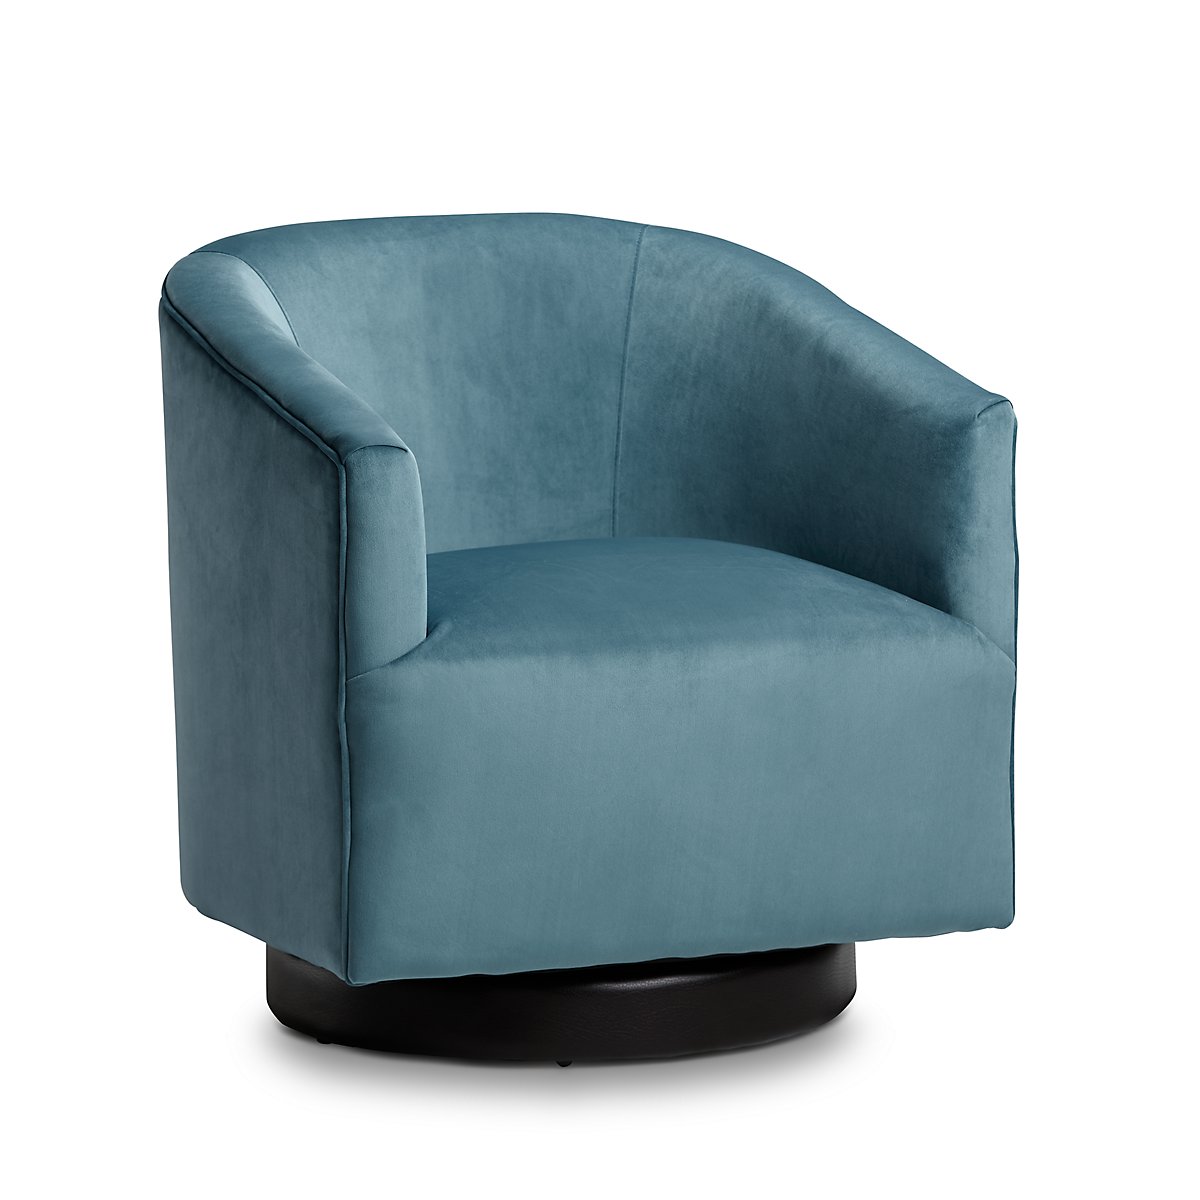 Blue Swivel Accent Chairs For Living Room Bedroom Ideas